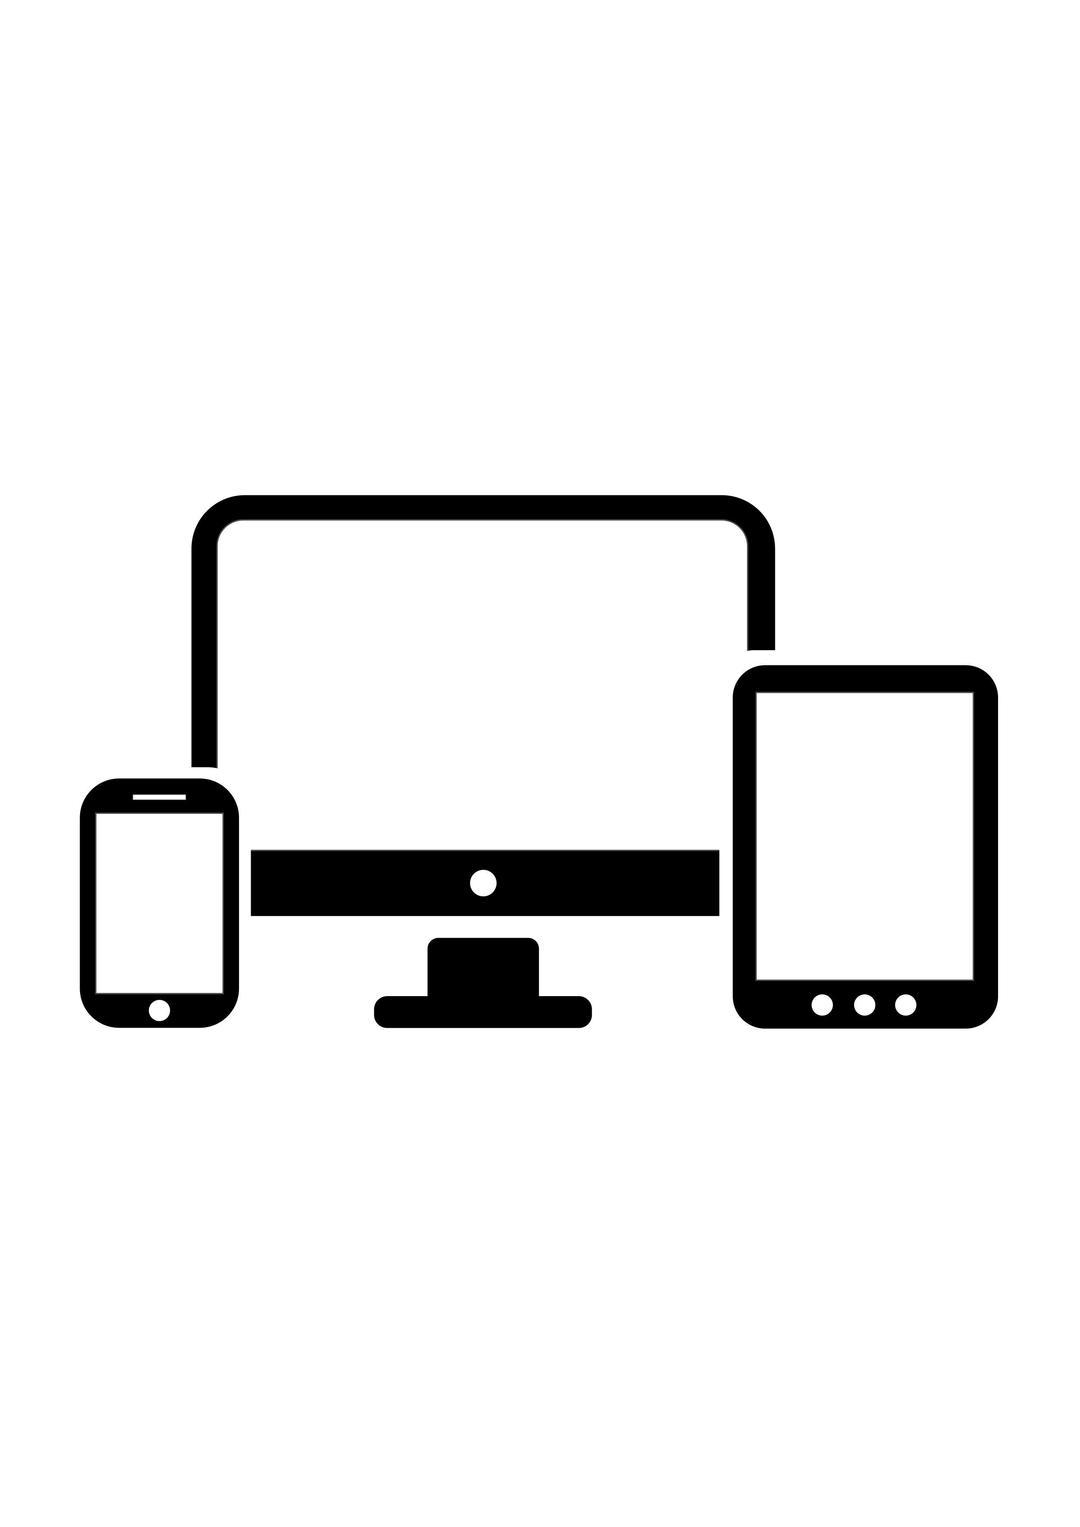 Computer Smartphone and Tablet png transparent